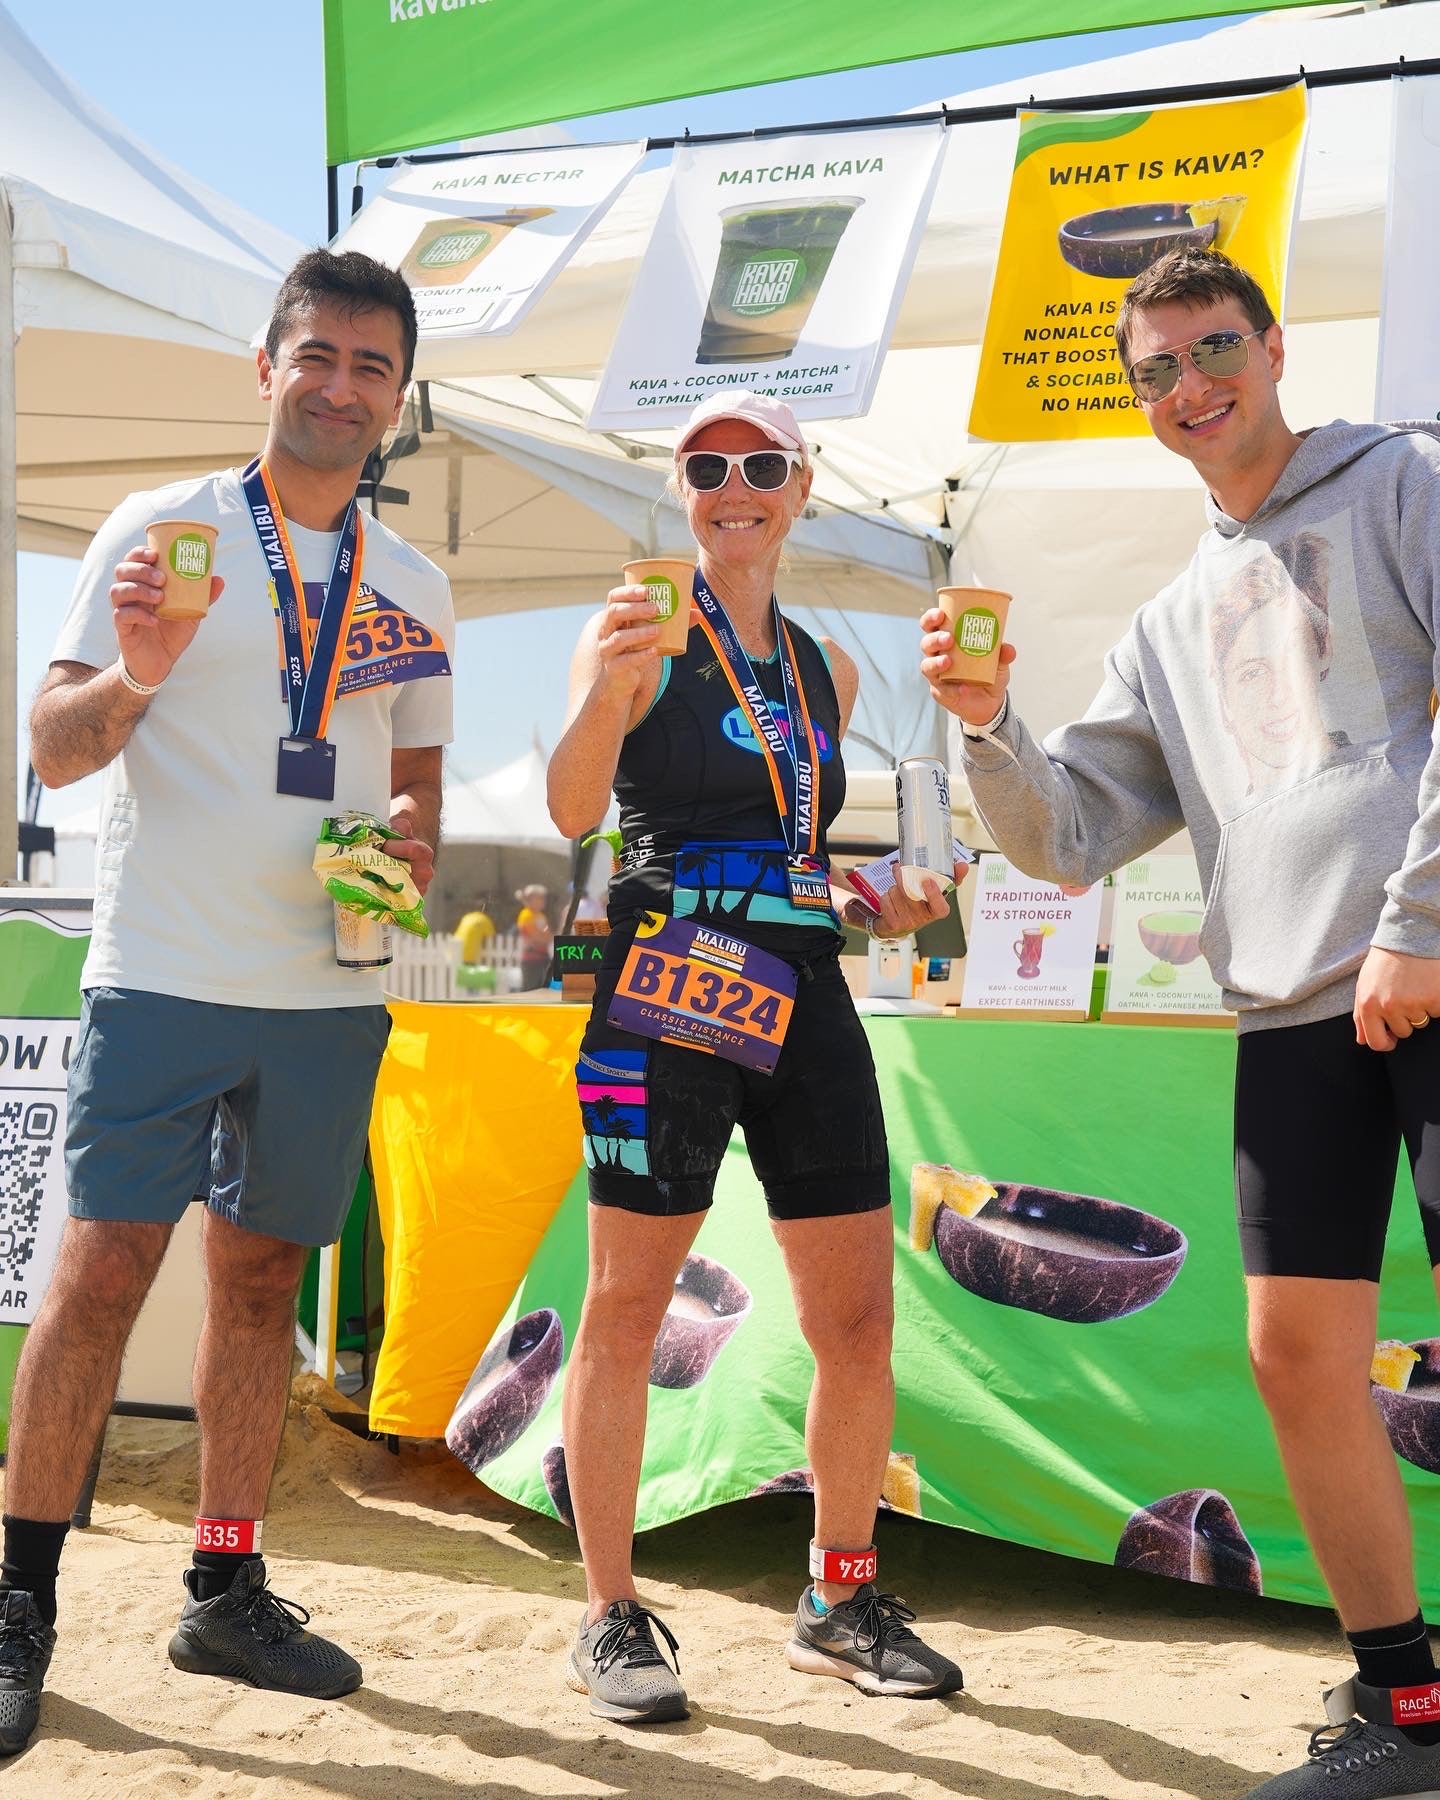 A photograph depicting 3 happy people enjoying kava nectar as a beverage on the beach during the sunny day at the malibu triathlon